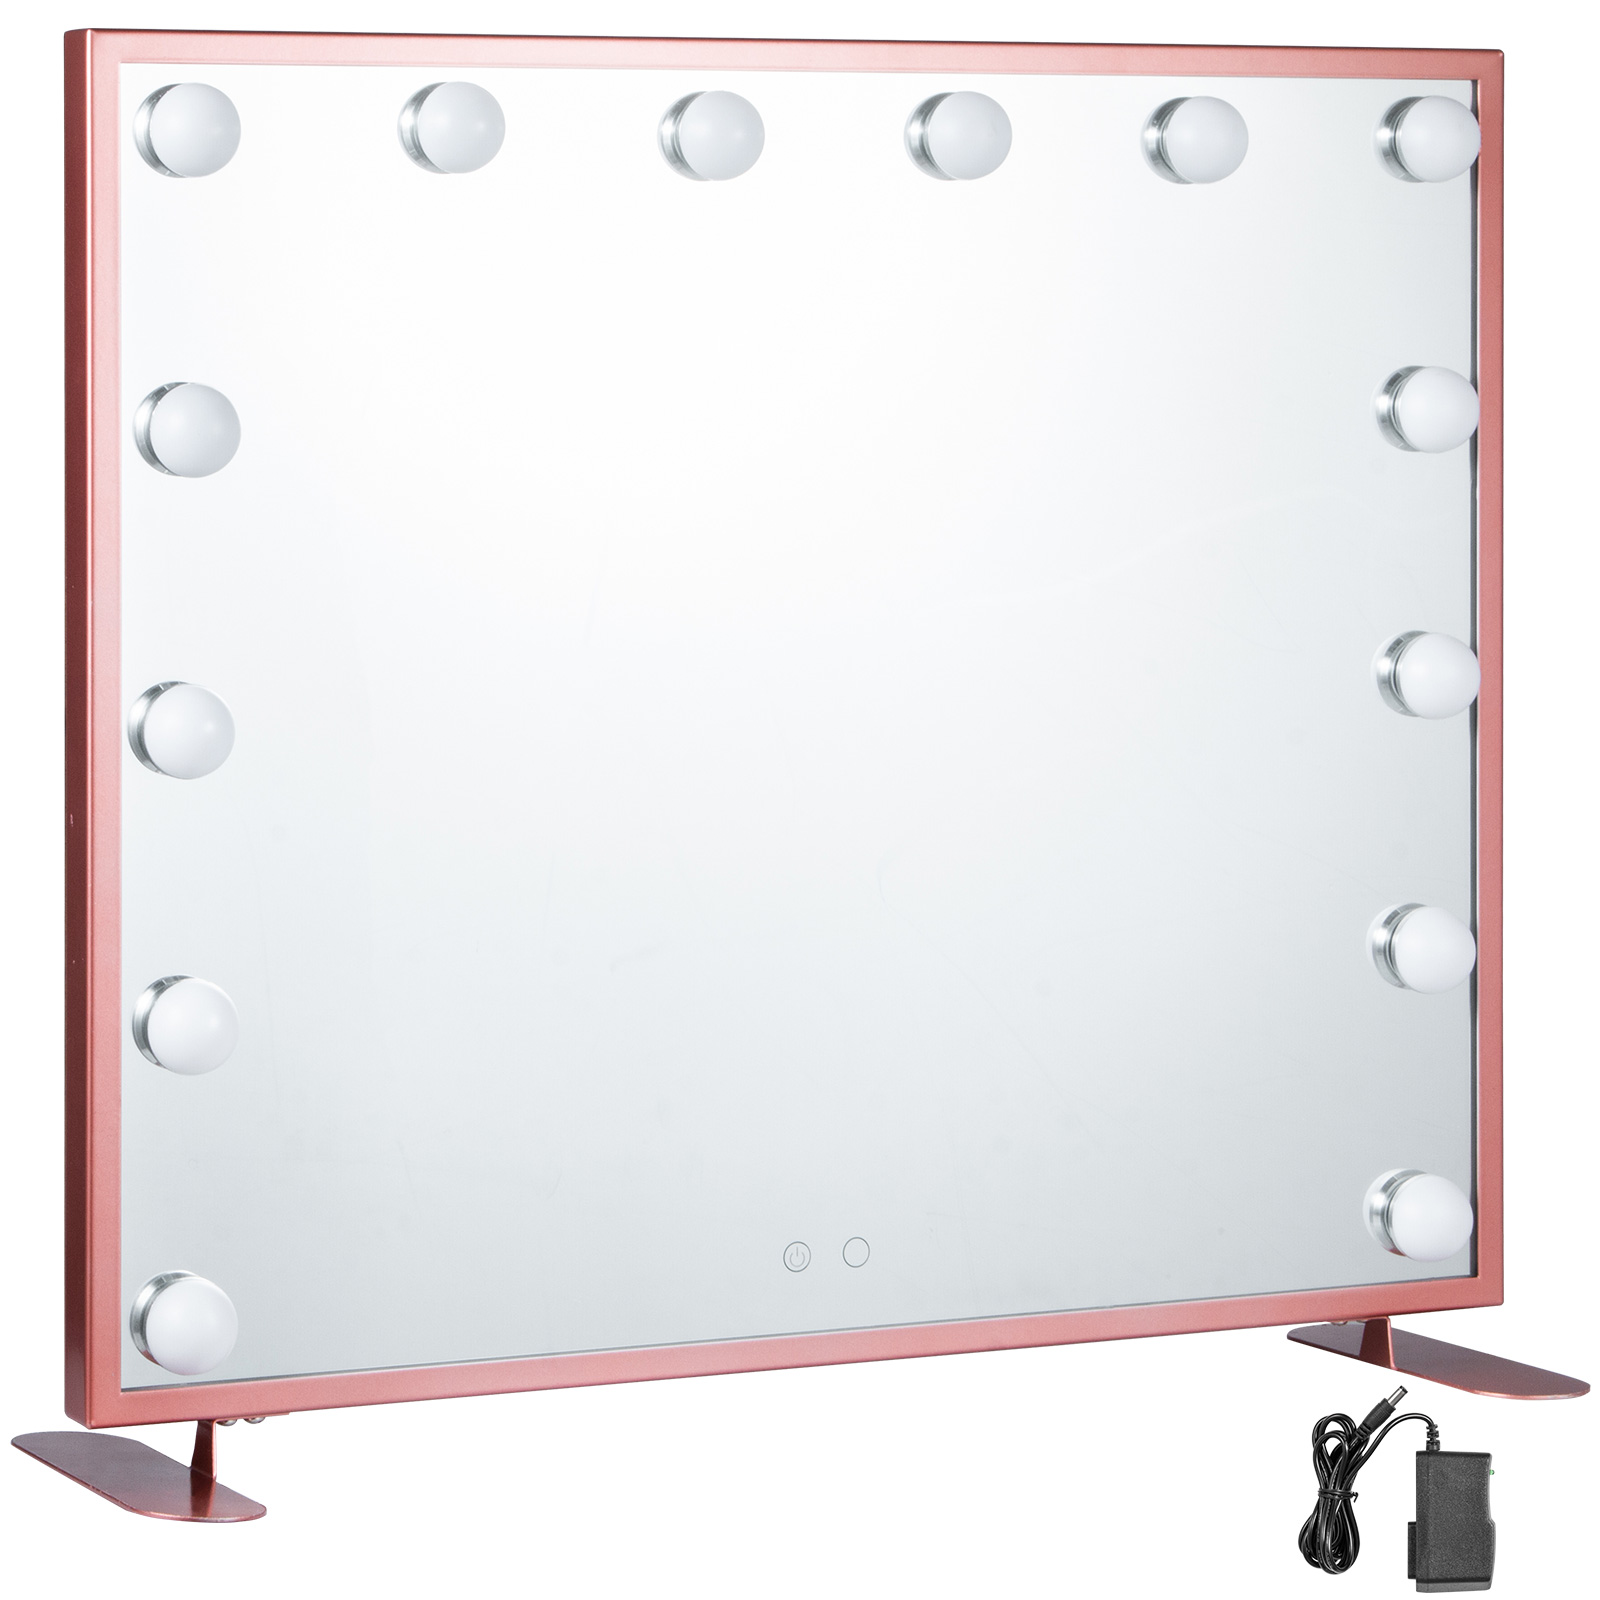 Luxury Hollywood Makeup Mirror Lighted Vanity Mirror Beauty Smart Touch Tabletop от Vevor Many GEOs